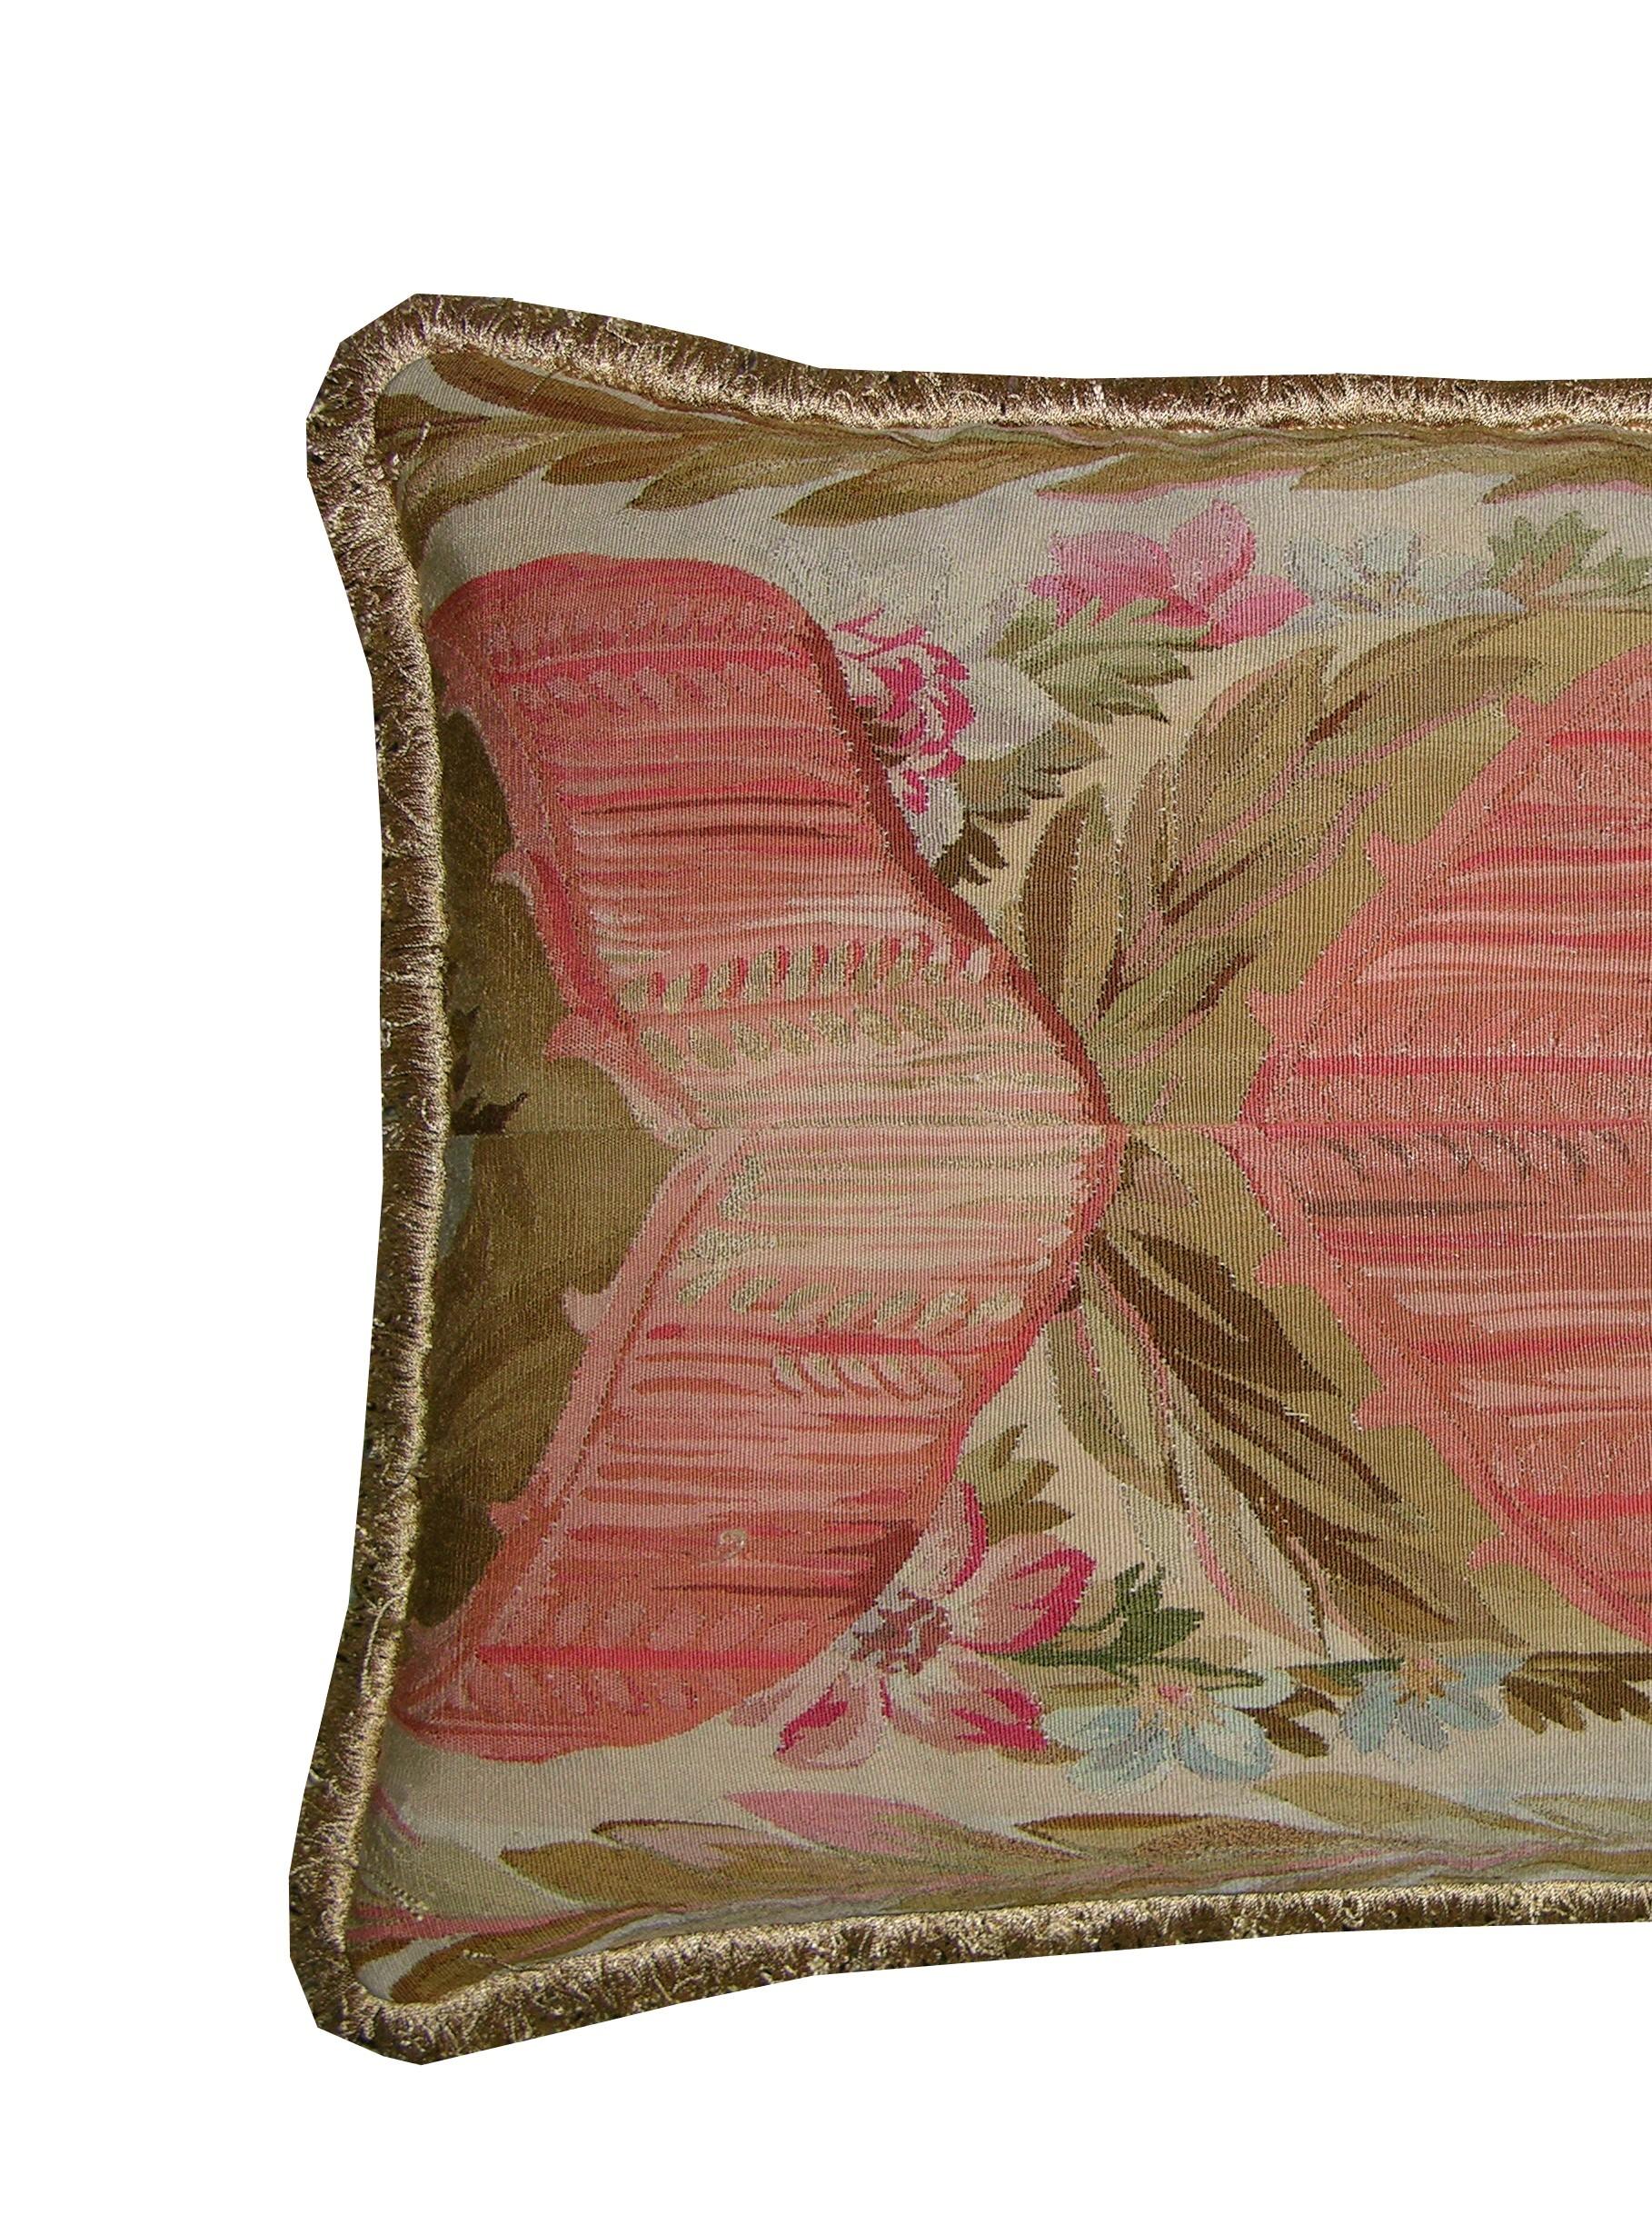 Ca. 1860 Antique French Aubusson Pillow